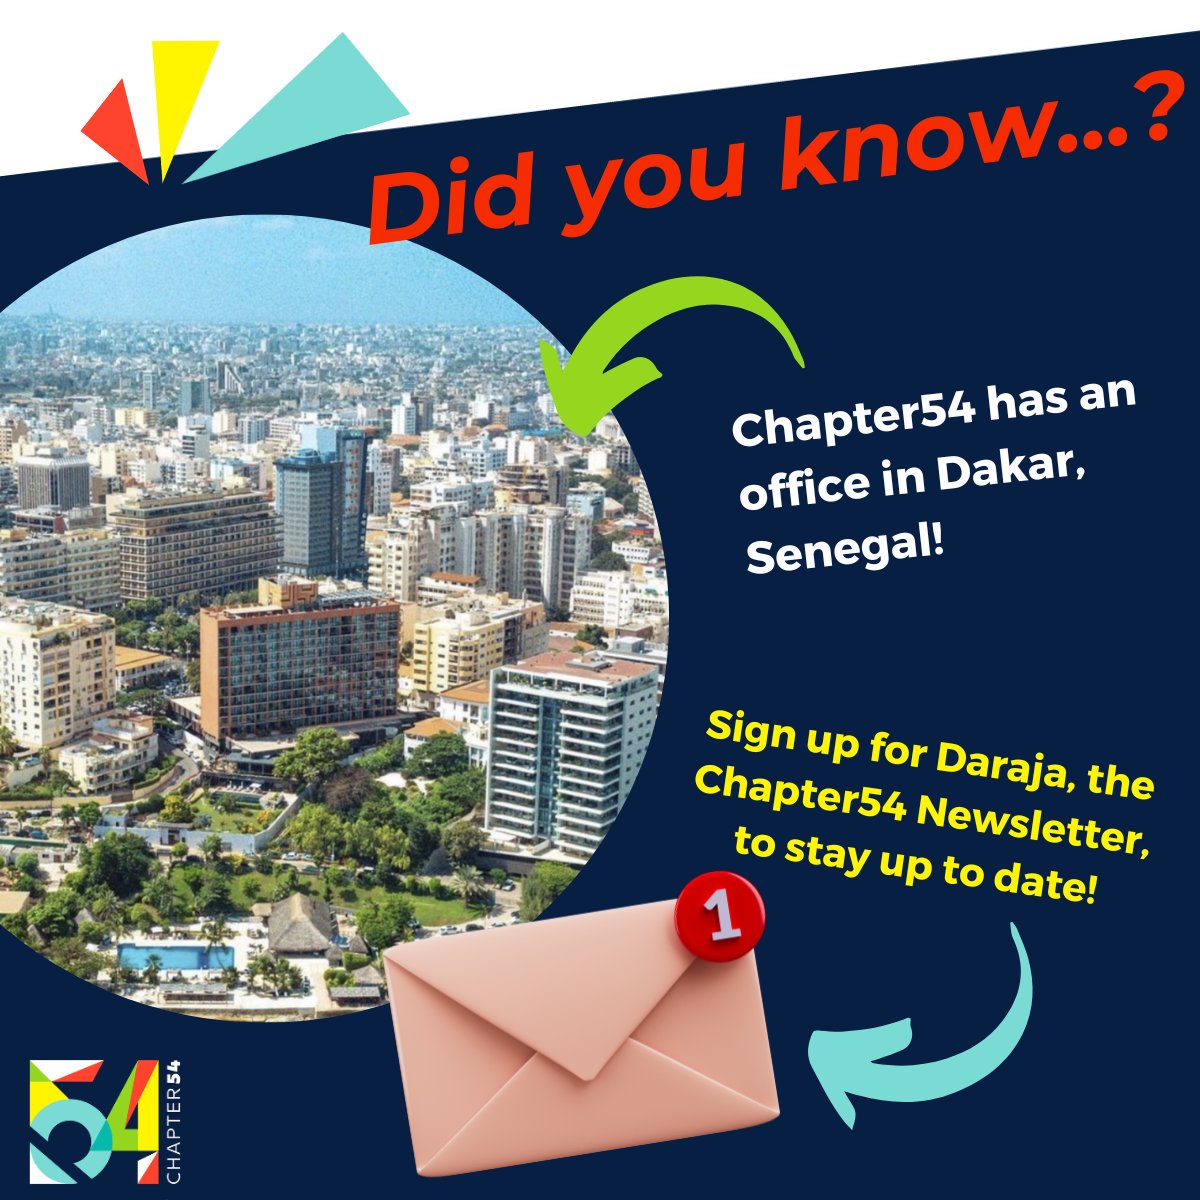 Never miss a beat! The newest edition of Daraja, the Chapter54 newsletter, will be going out soon. Sign up for our newsletter now 👇 shorturl.at/qST13